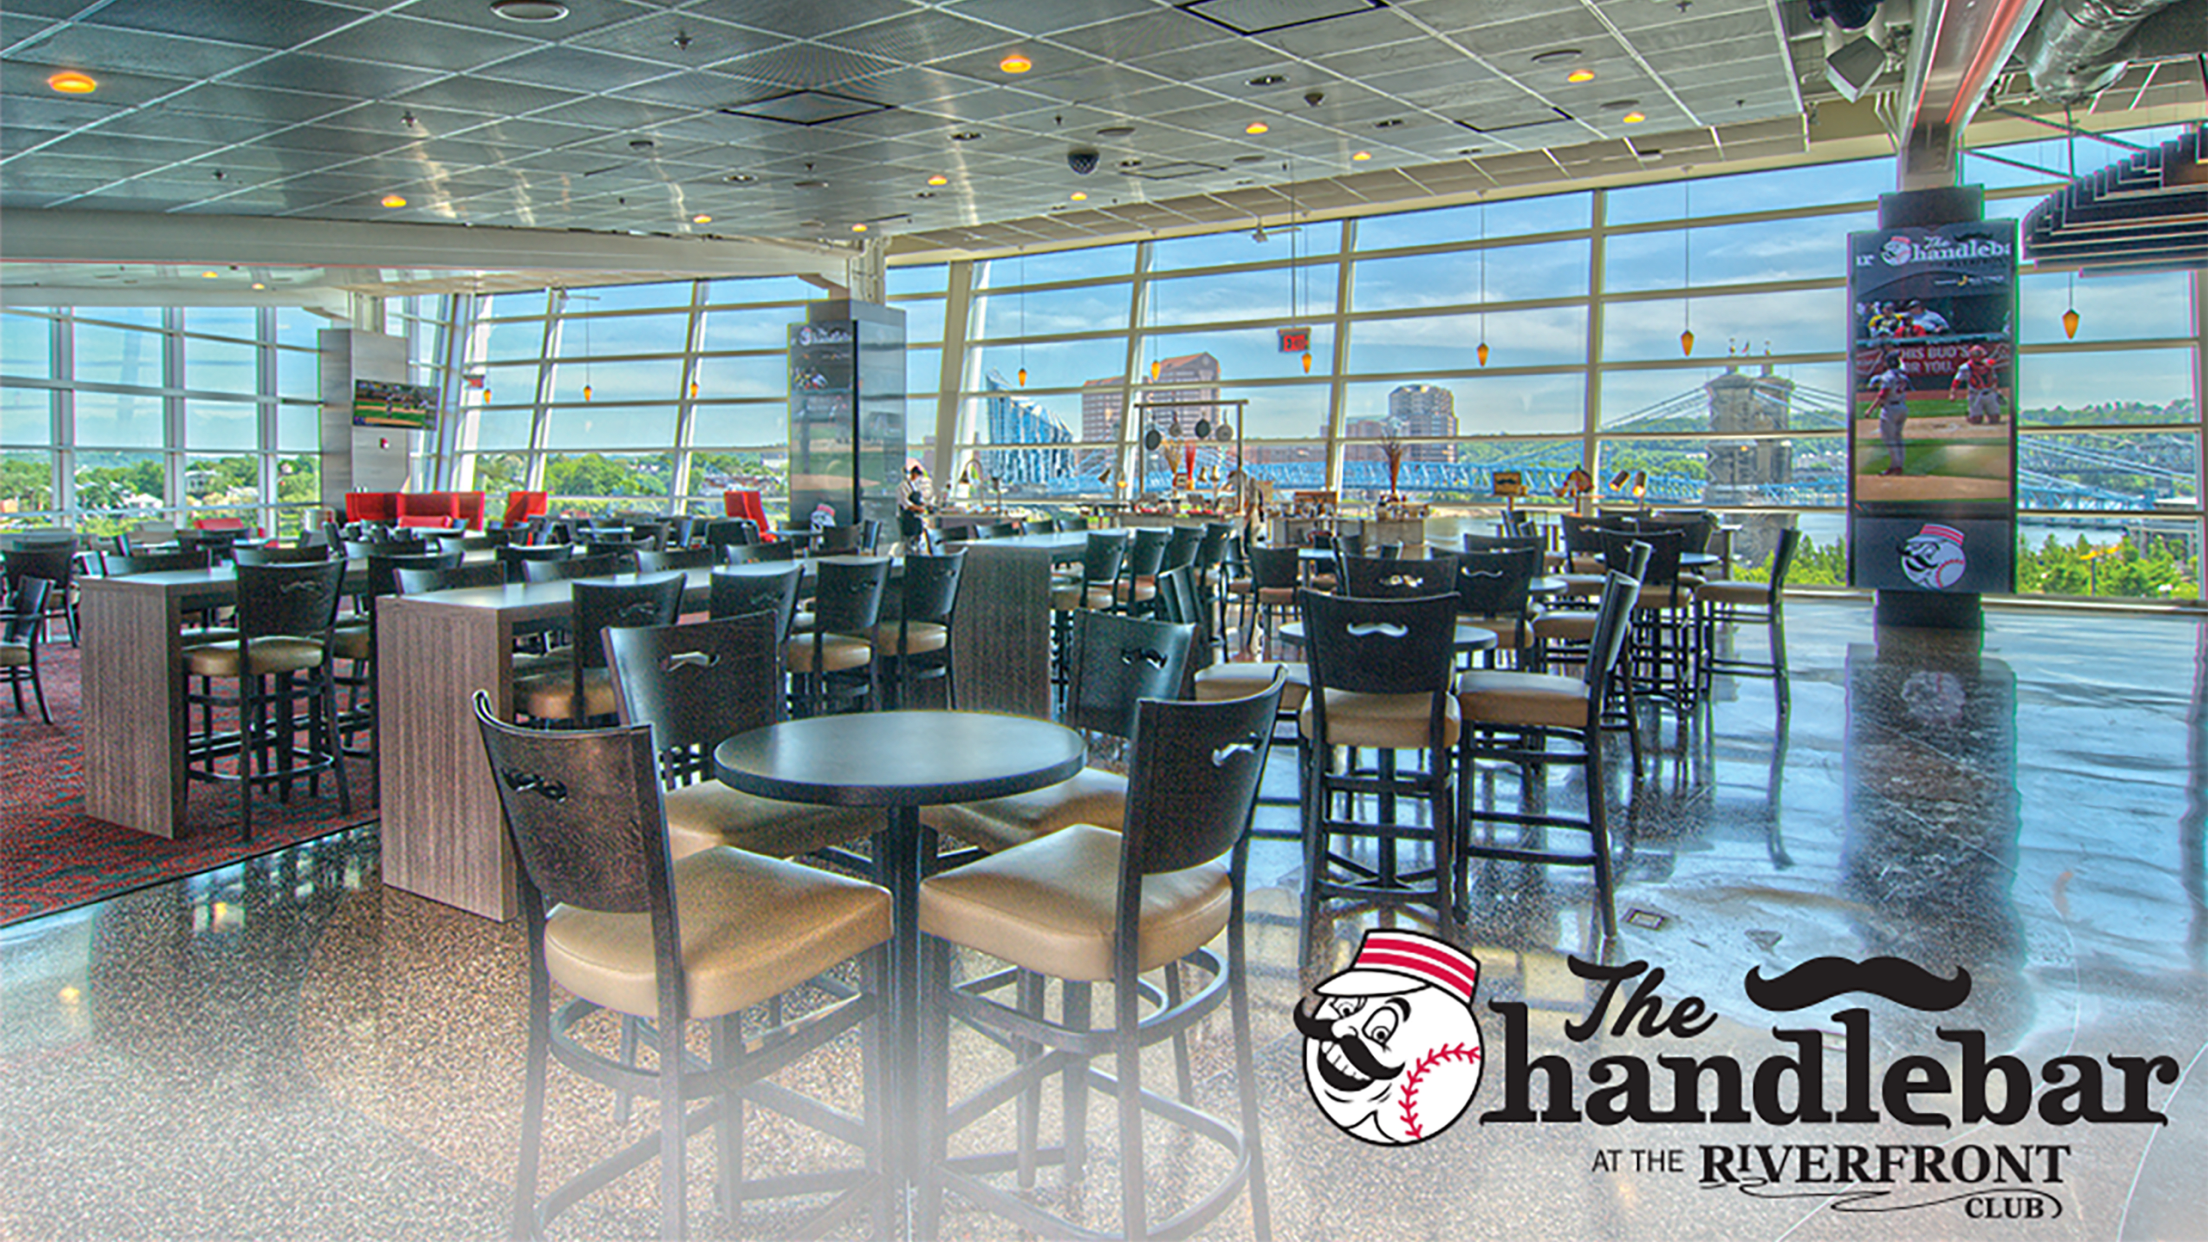 Where to eat in Cincinnati's Great American Ball Park during a Red's Game